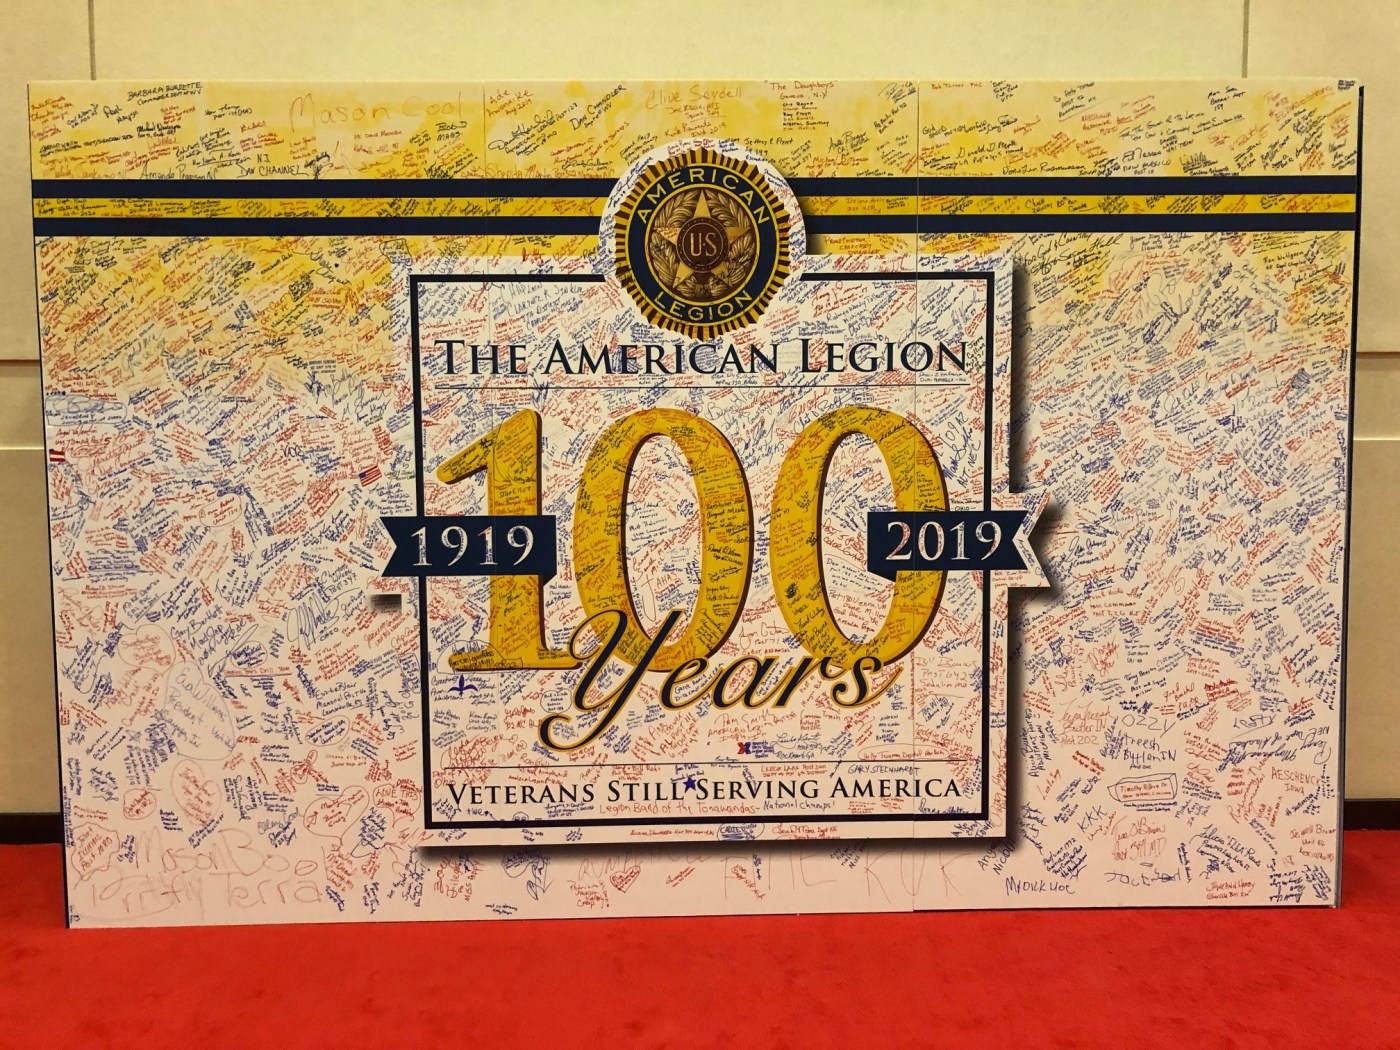 American Legion Annual Convention poster signed by Veterans.